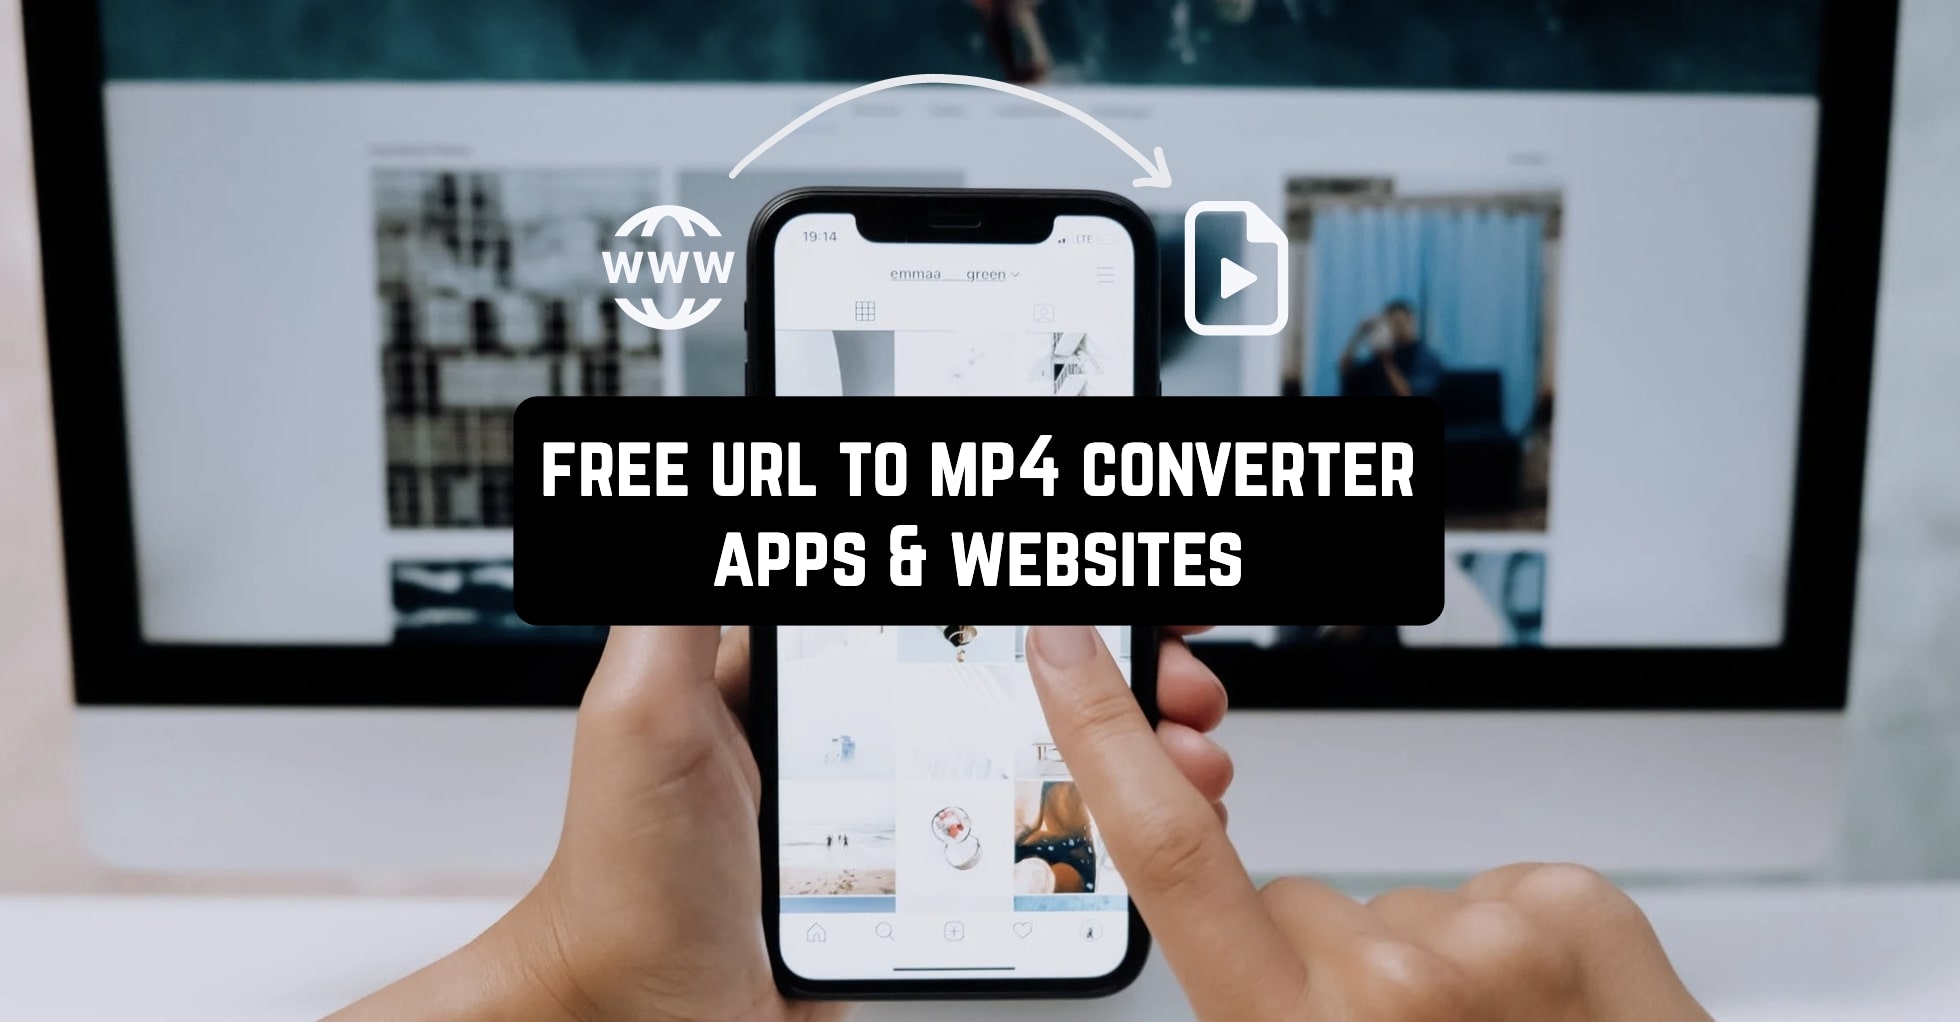 11-Free-URL-To-MP4-Converter-Apps-Websites-2022